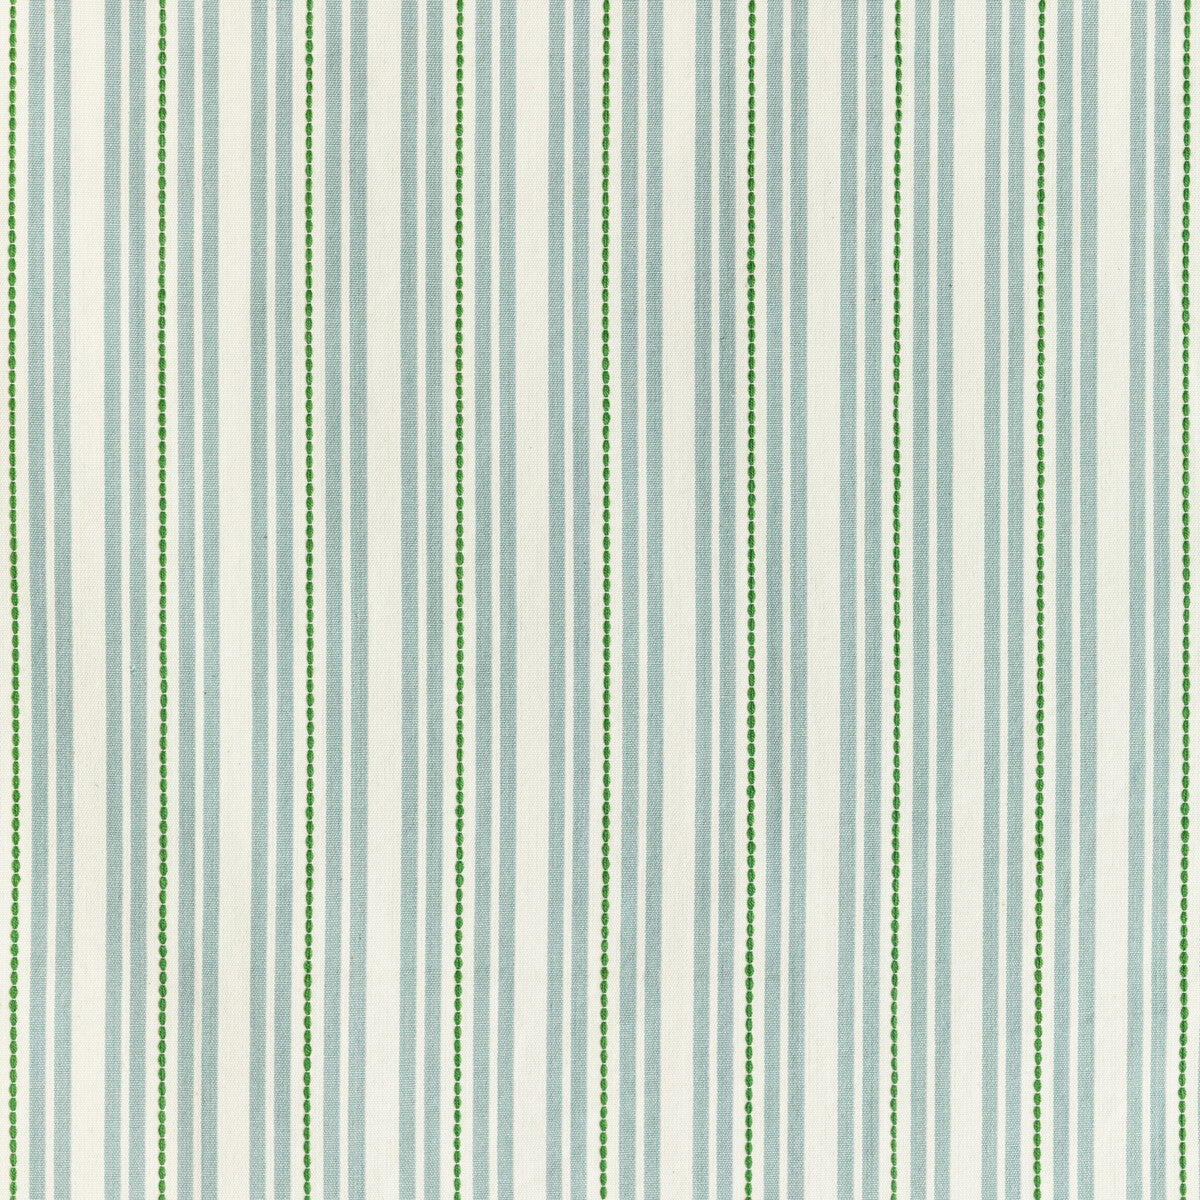 Basics fabric in 36046-135 color - pattern 36046.135.0 - by Kravet Basics in the L&